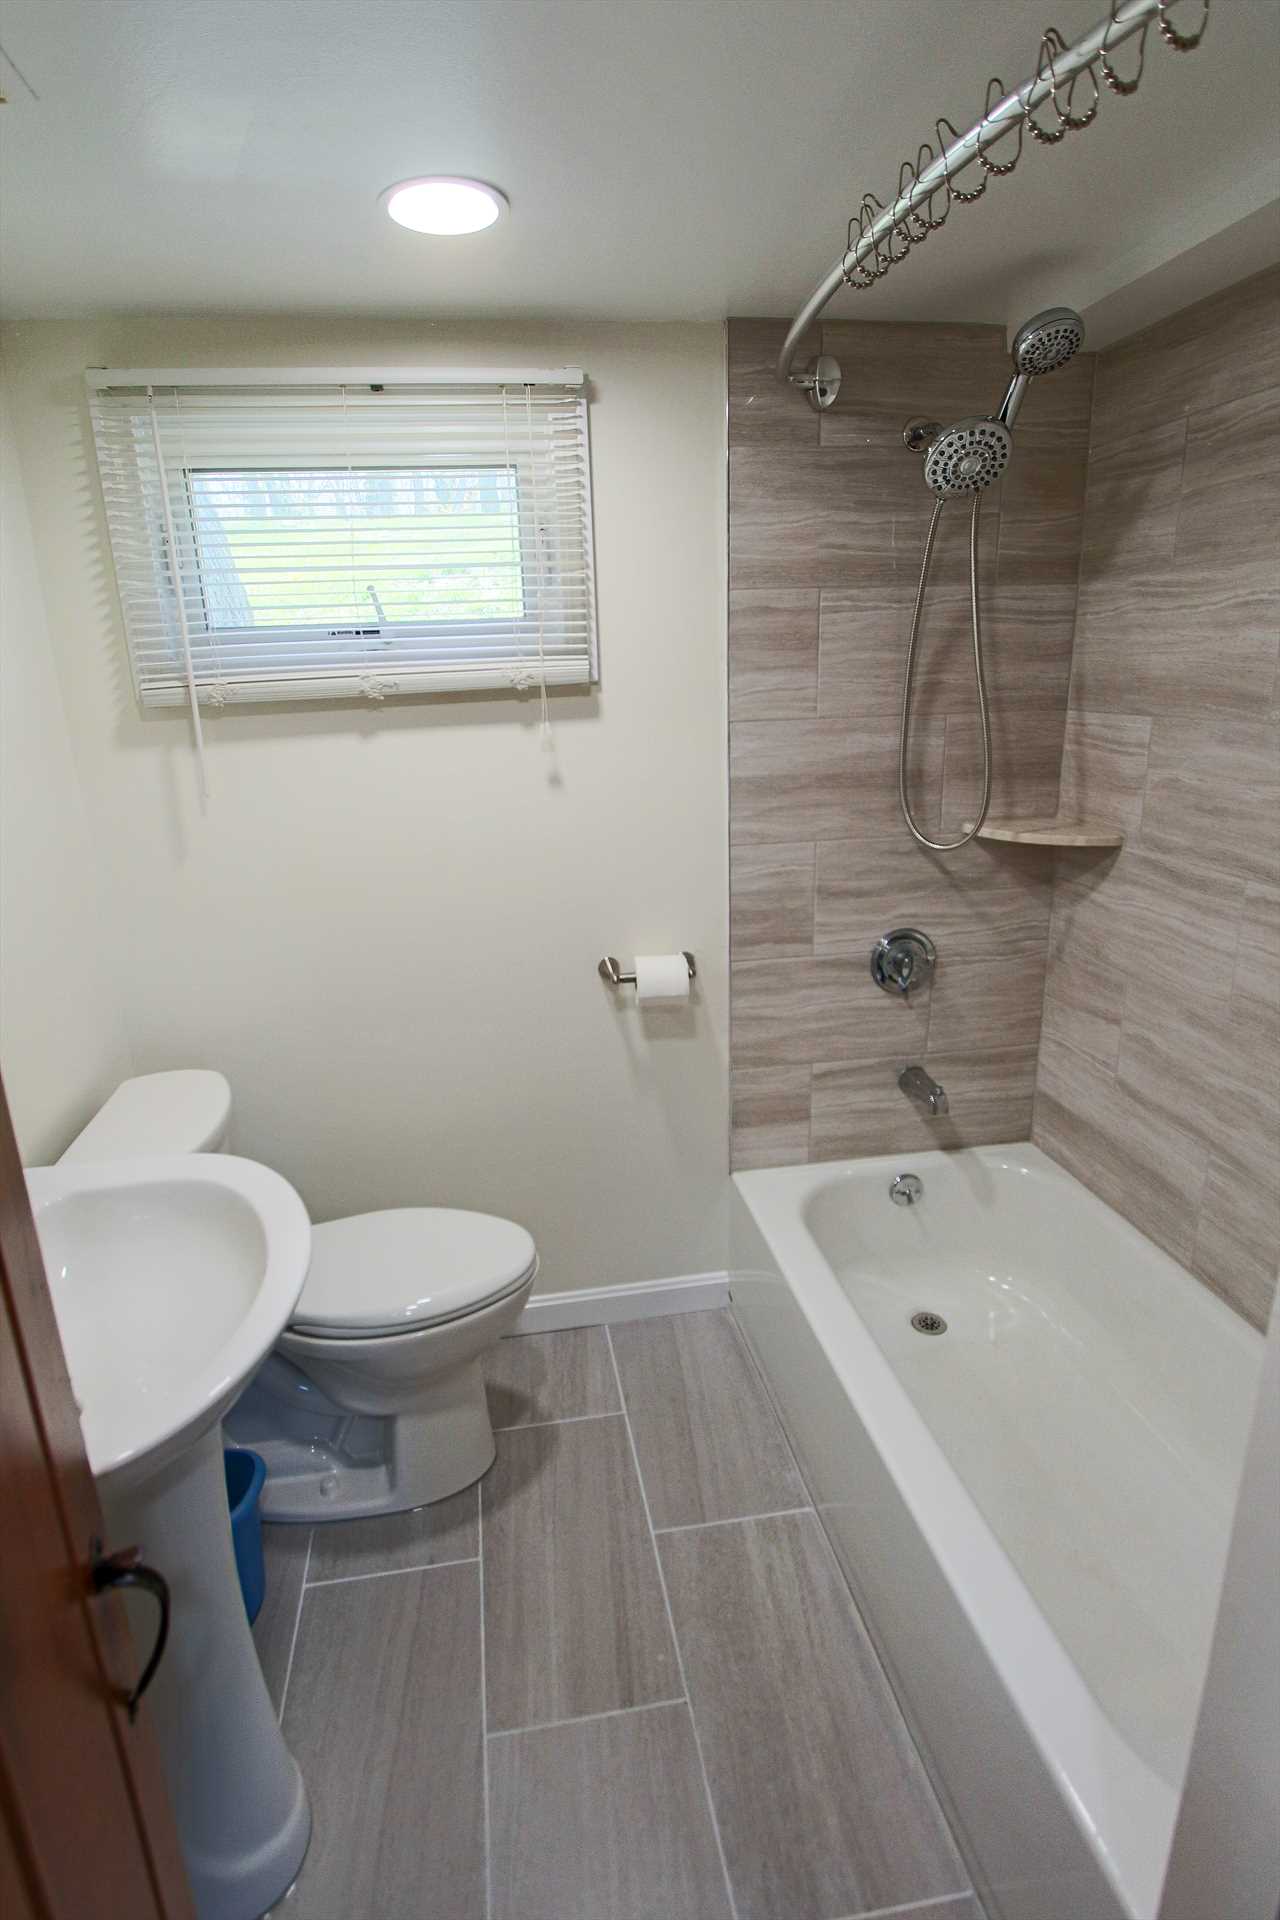 Bathroom - New as of 2023 (shower curtain not pictured)